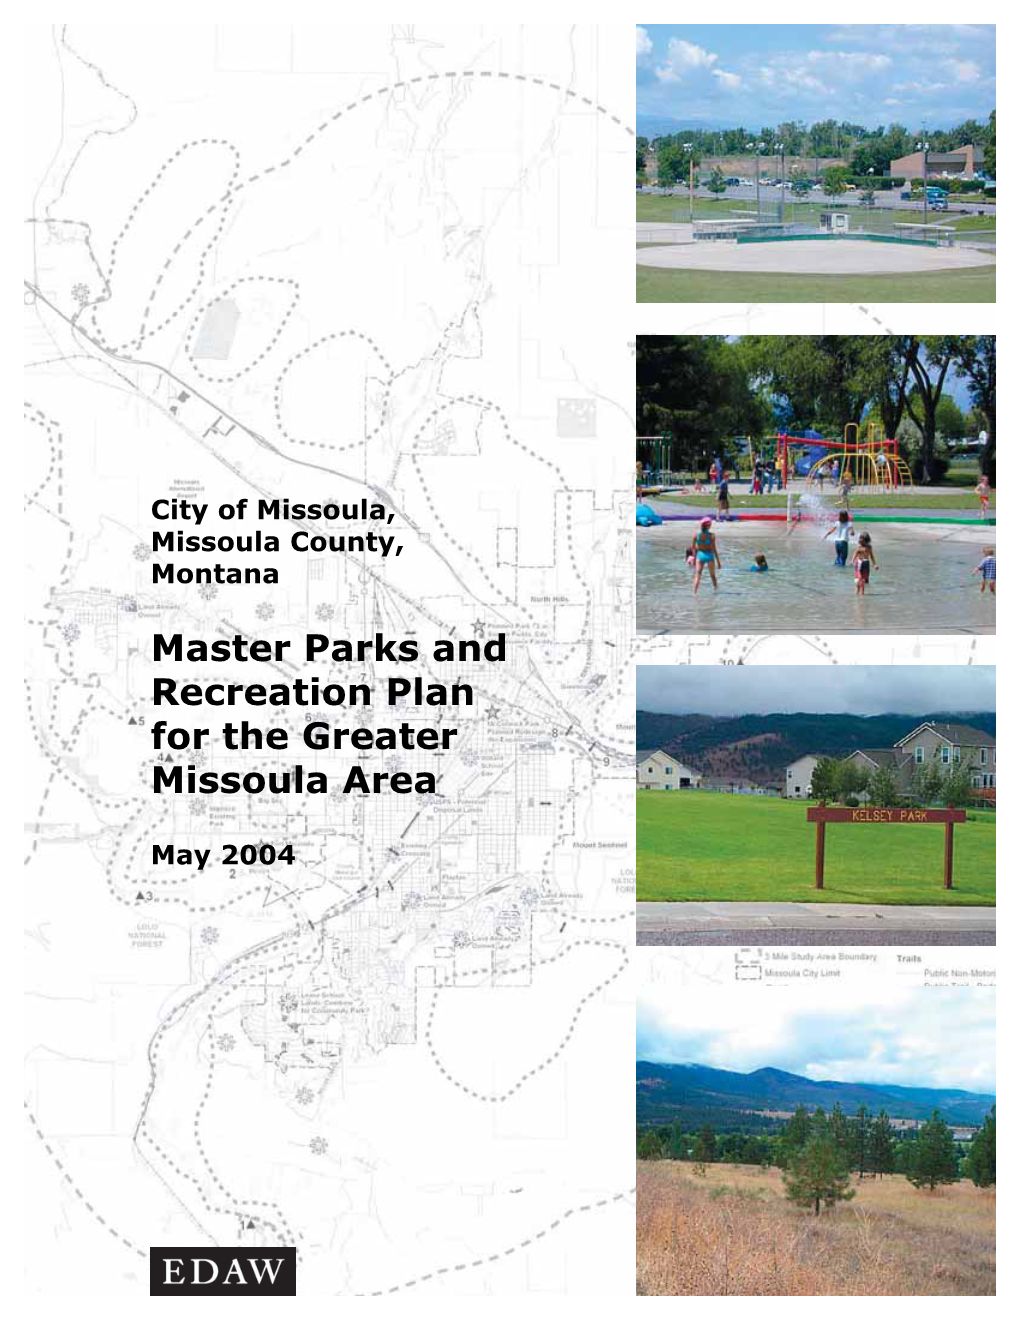 Master Parks and Recreation Plan for the Greater Missoula Area